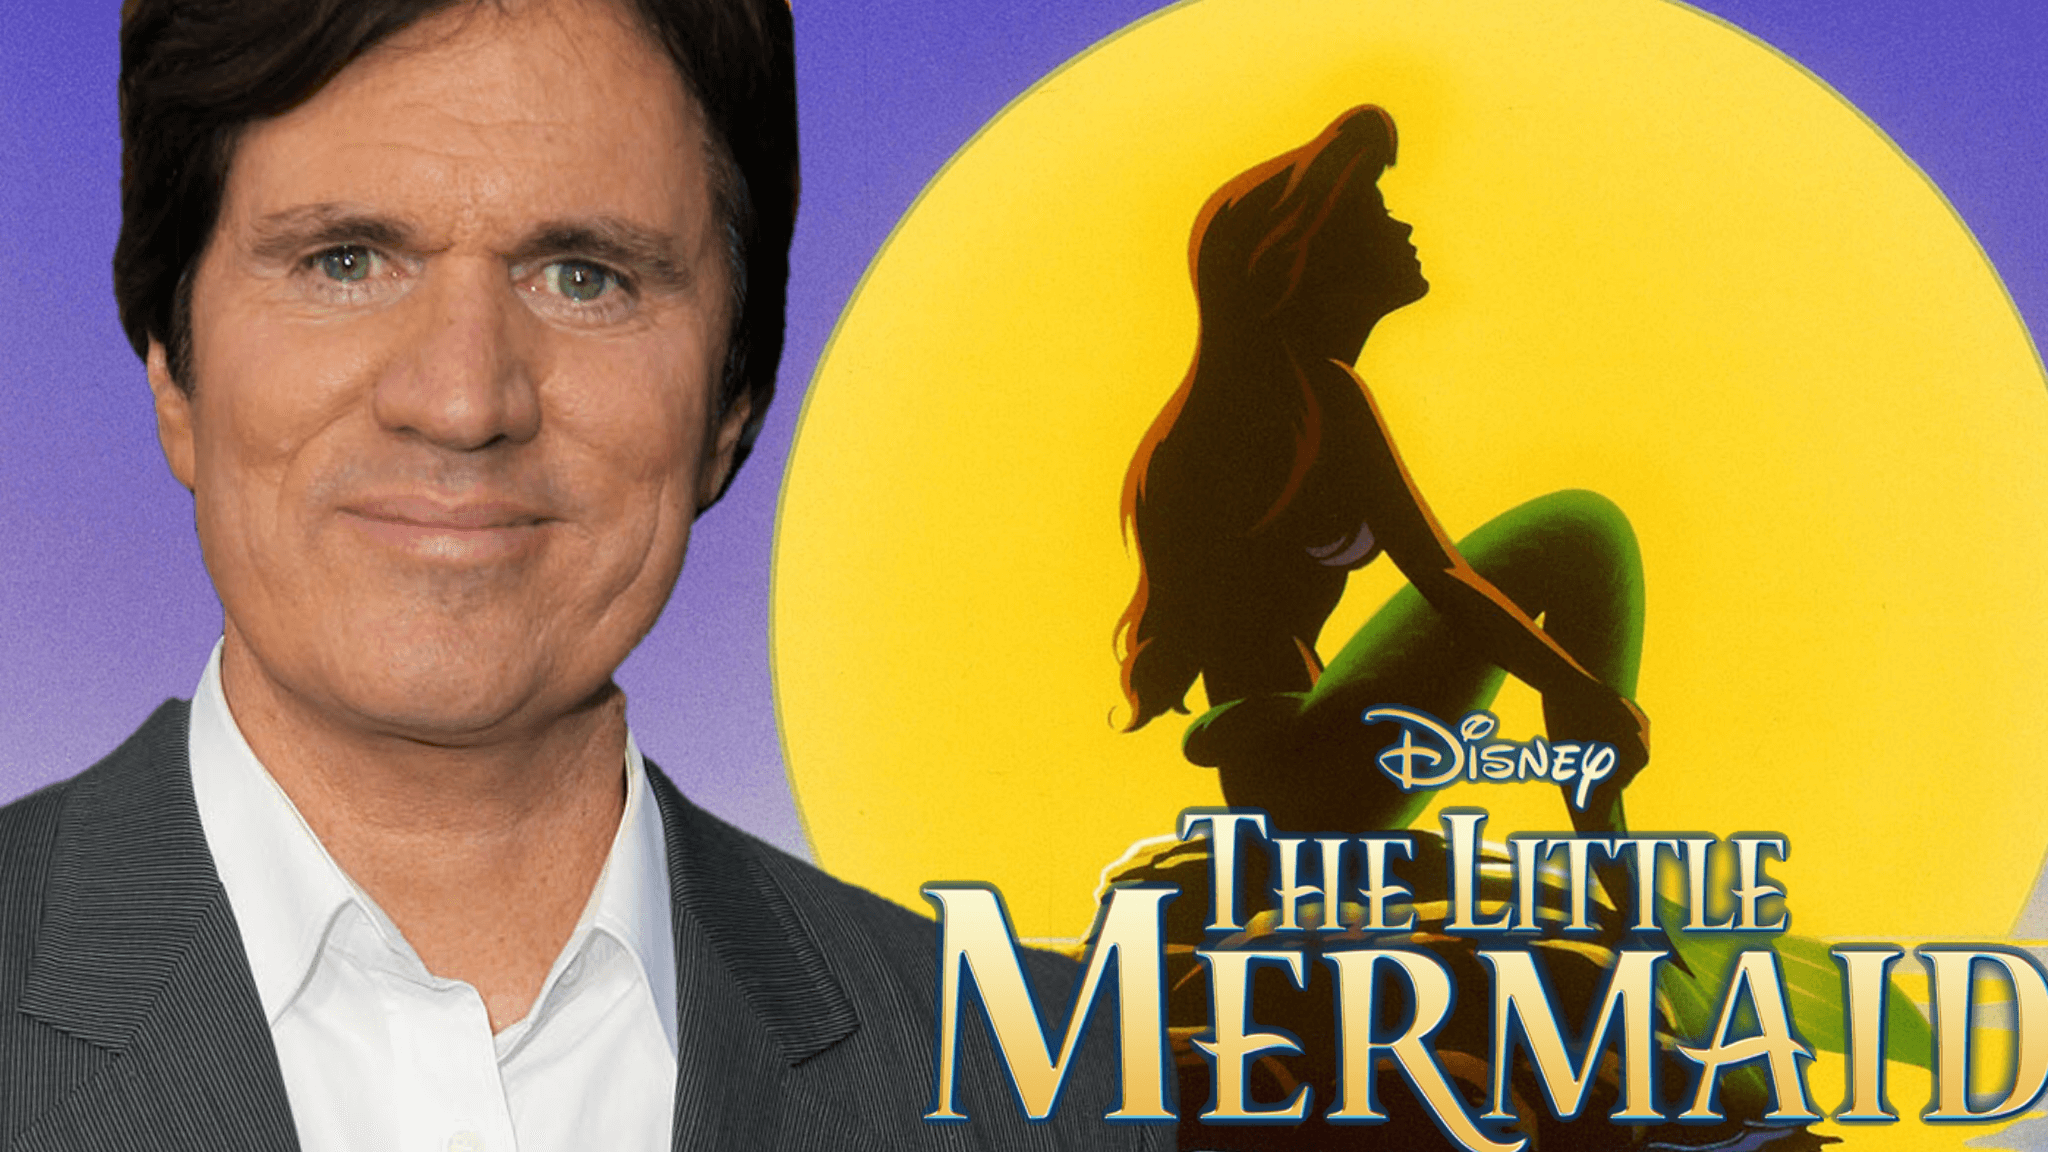 MARY POPPINS RETURNS Director Rob Marshall Is Disney’s Top Choice To Direct The Live-Action LITTLE MERMAID Remake!